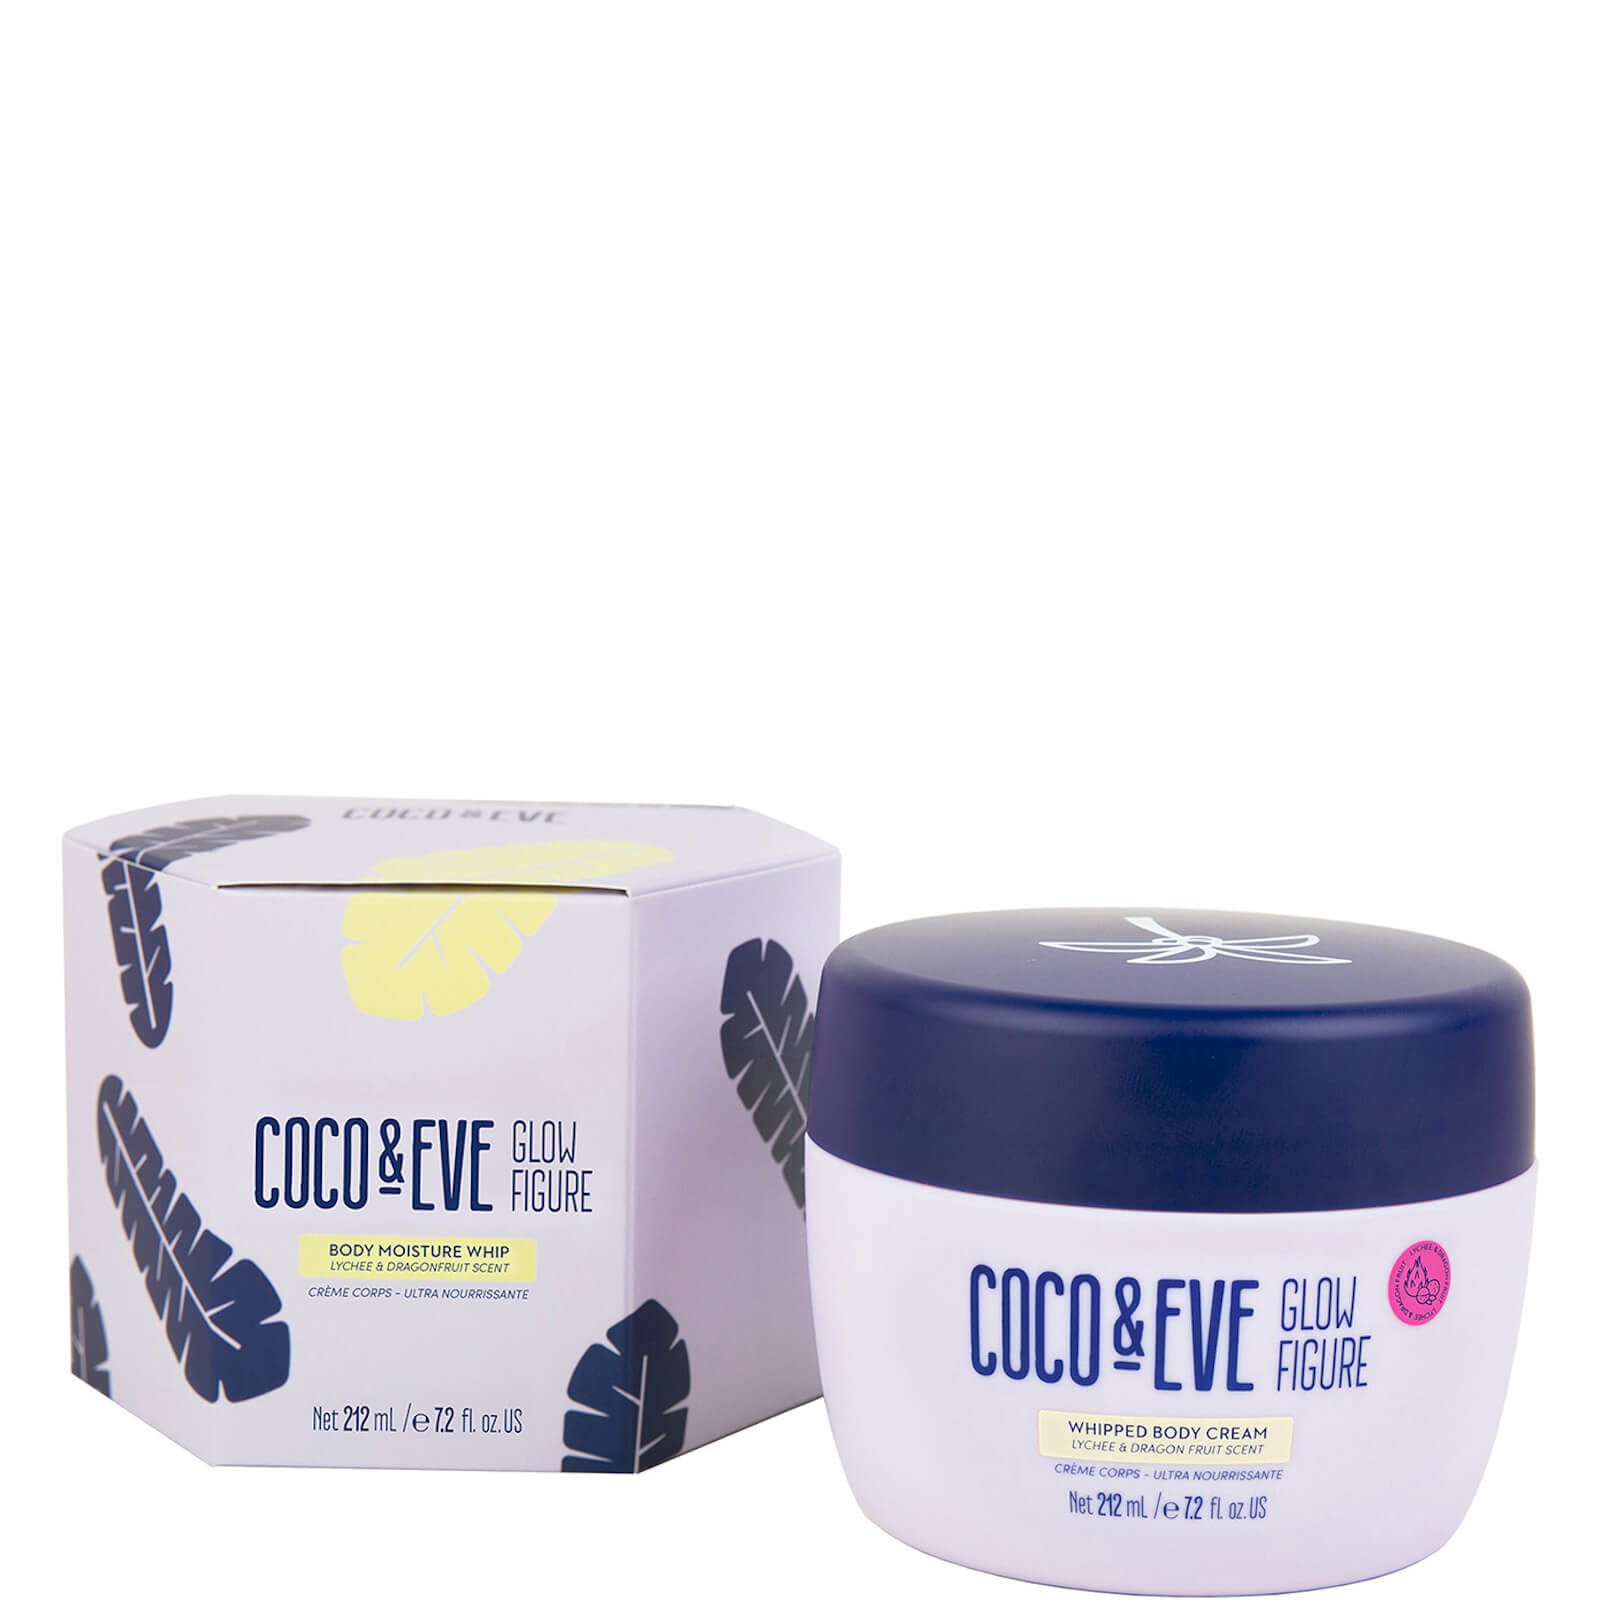 Image of Coco & Eve Glow Figure Whipped Body Cream Lychee and Dragon Fruit Scent - (Varie Dimensioni) - 212ml